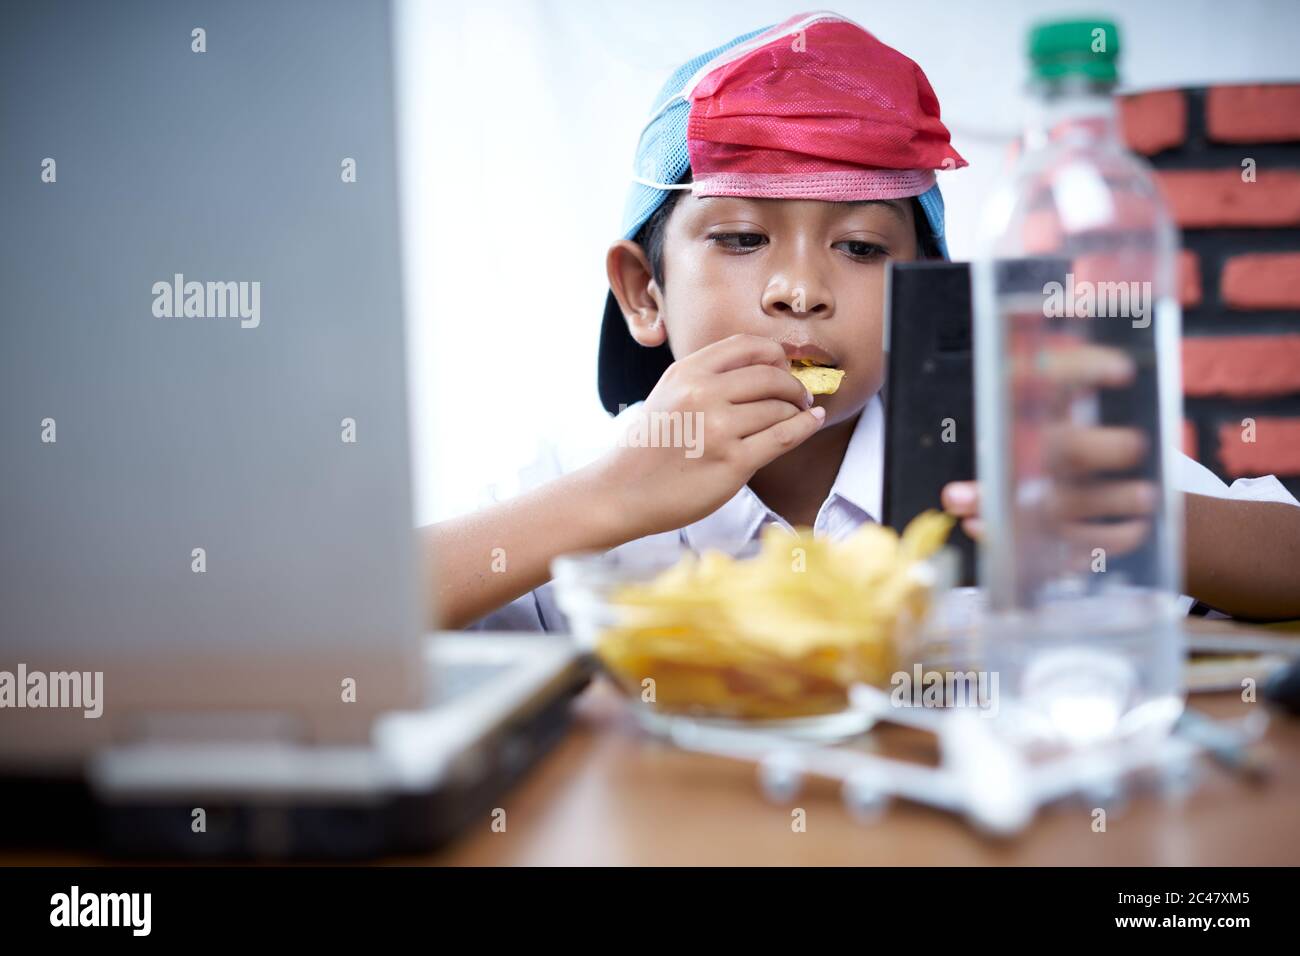 Young boy eating chips snack while study at home, New Normal Education concept Stock Photo